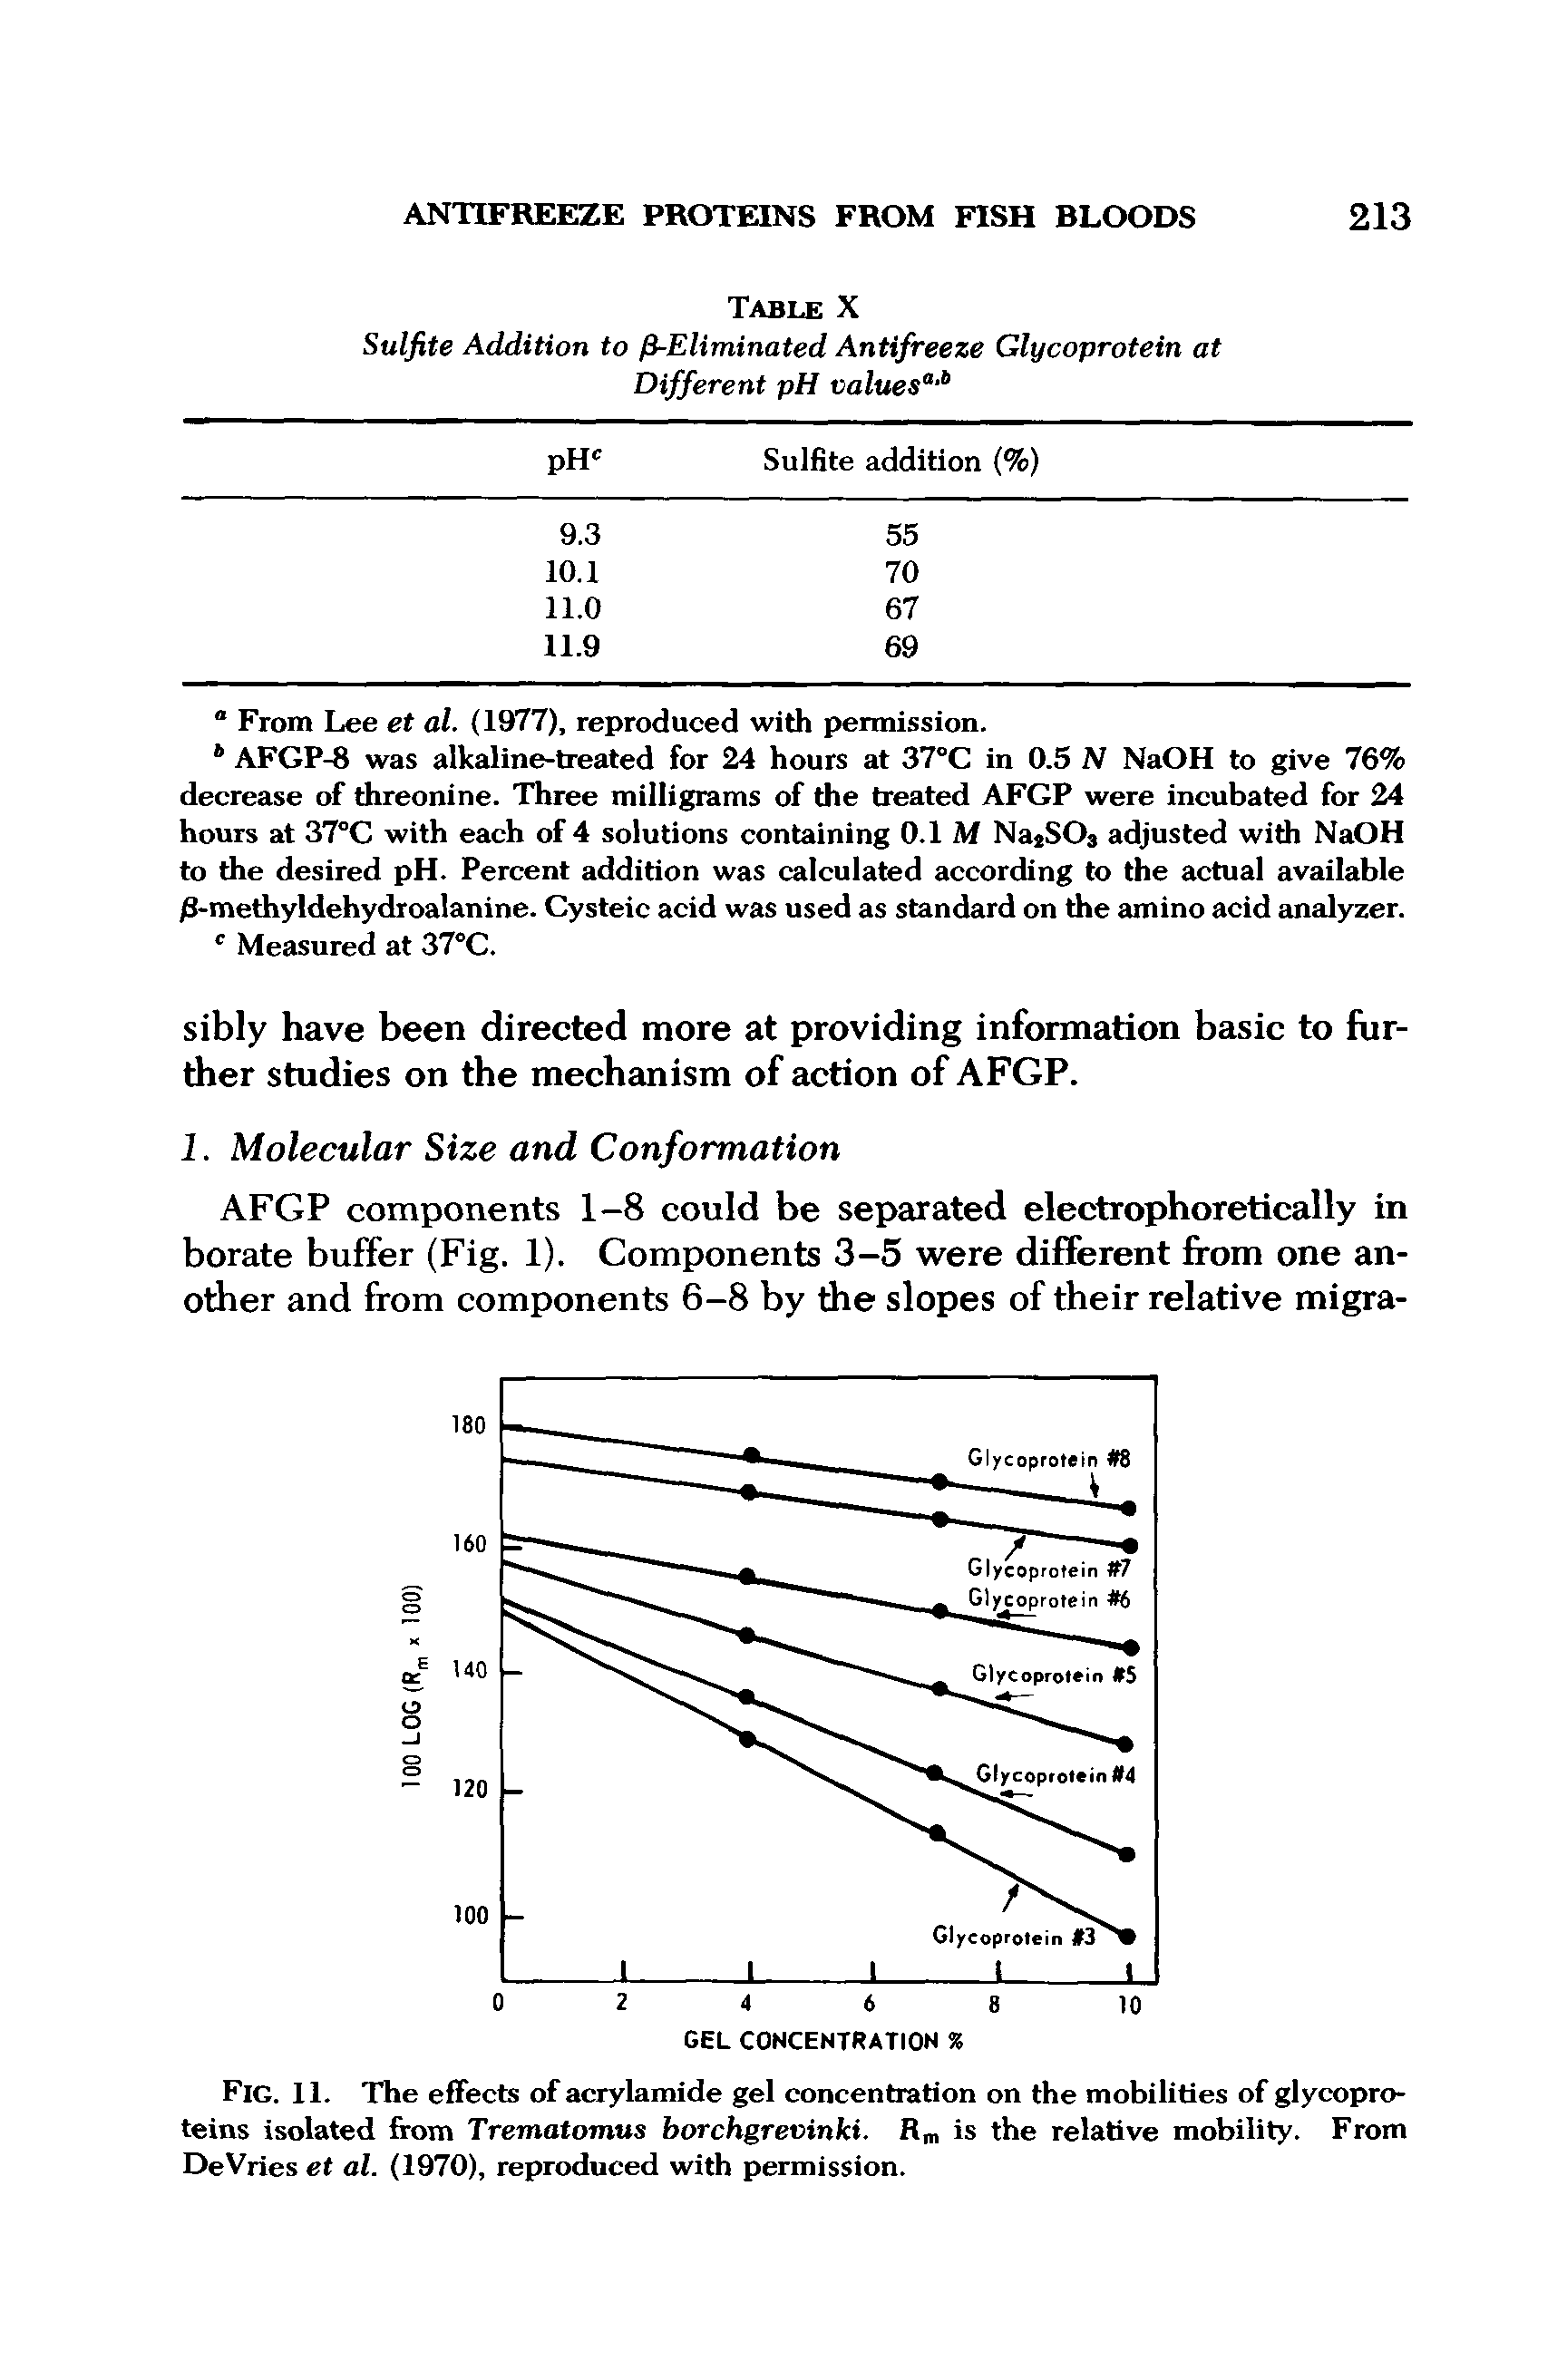 Fig. 11. The effects of acrylamide gel concentration on the mobilities of glycoproteins isolated from Trematomus borchgrevinki. Rm is the relative mobility. From DeVries et al. (1970), reproduced with permission.